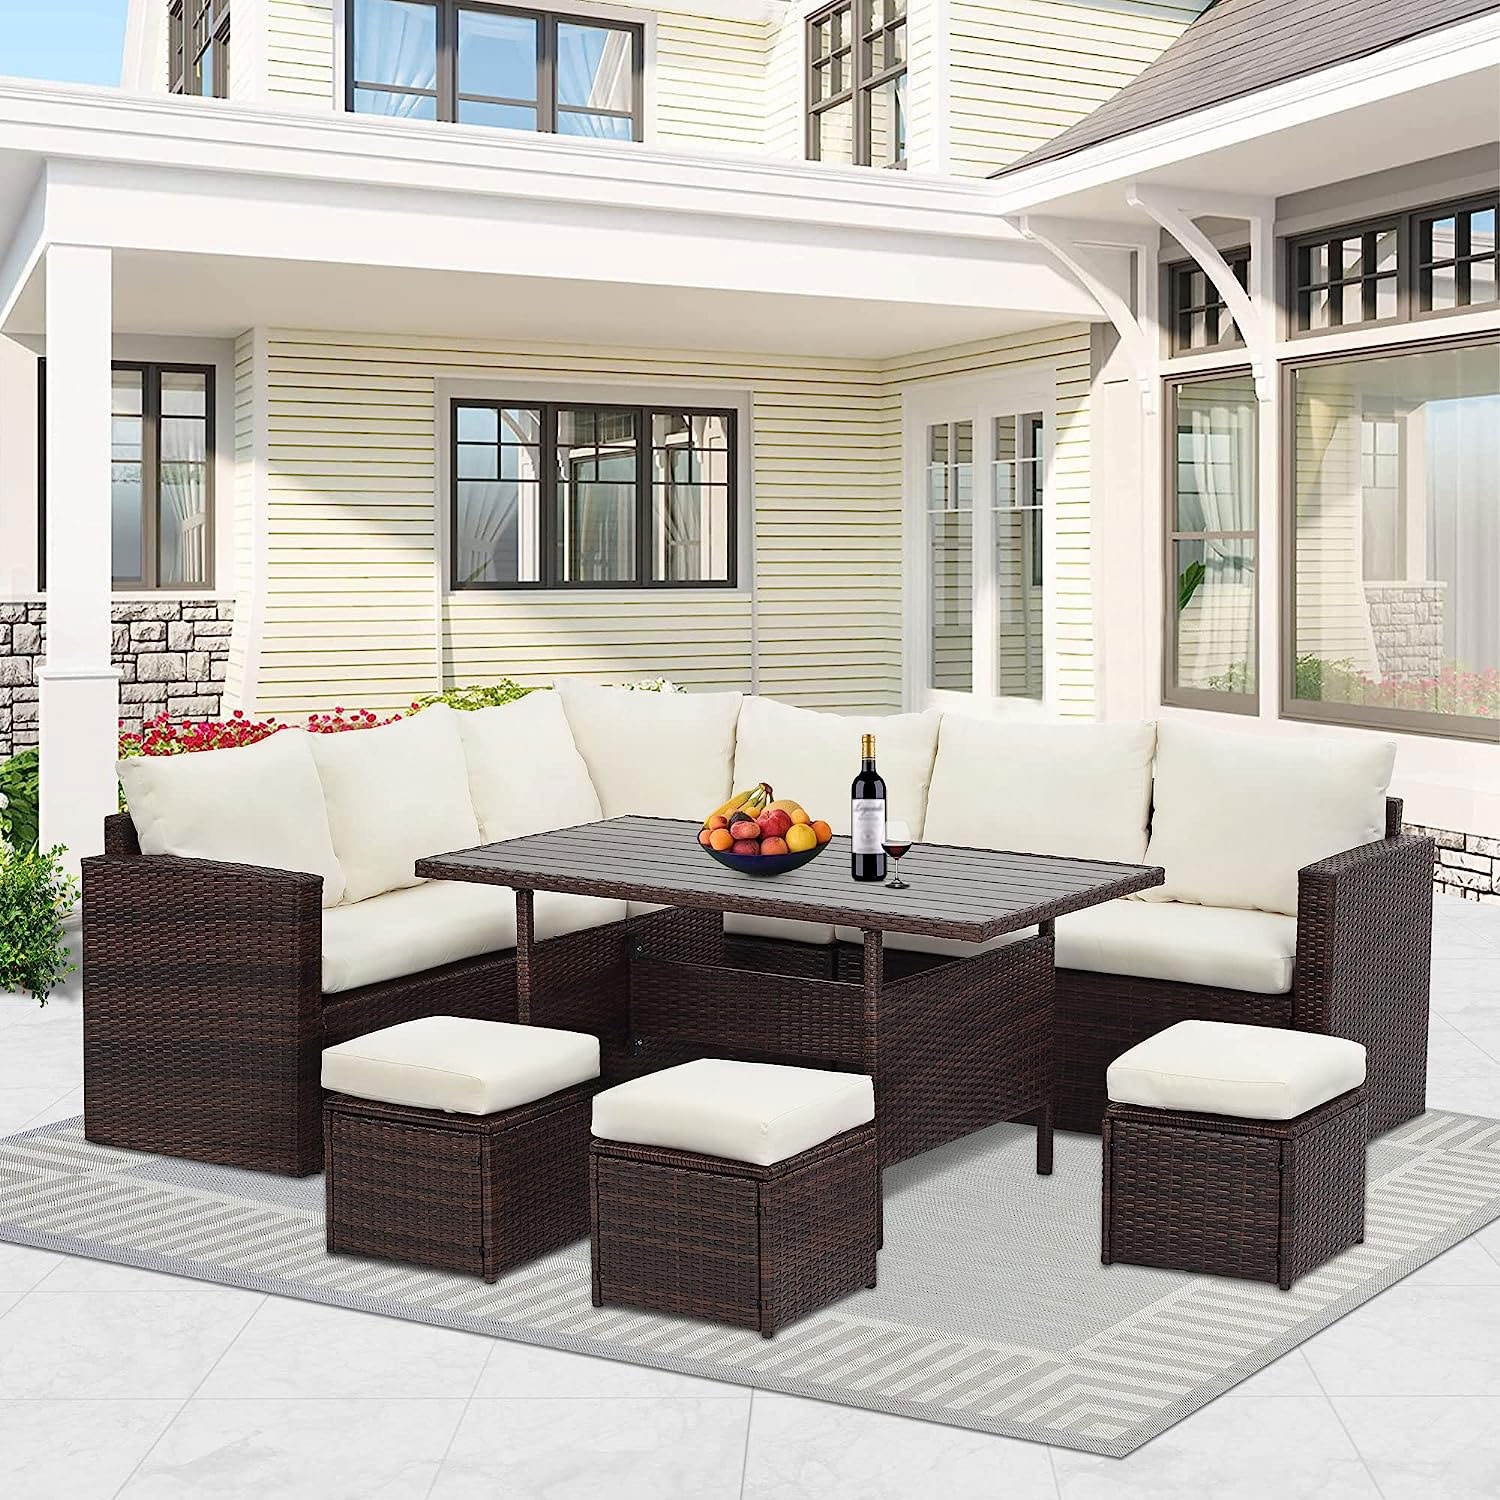 Outdoor wicker furniture set by Solaste, perfect for your patio or garden.